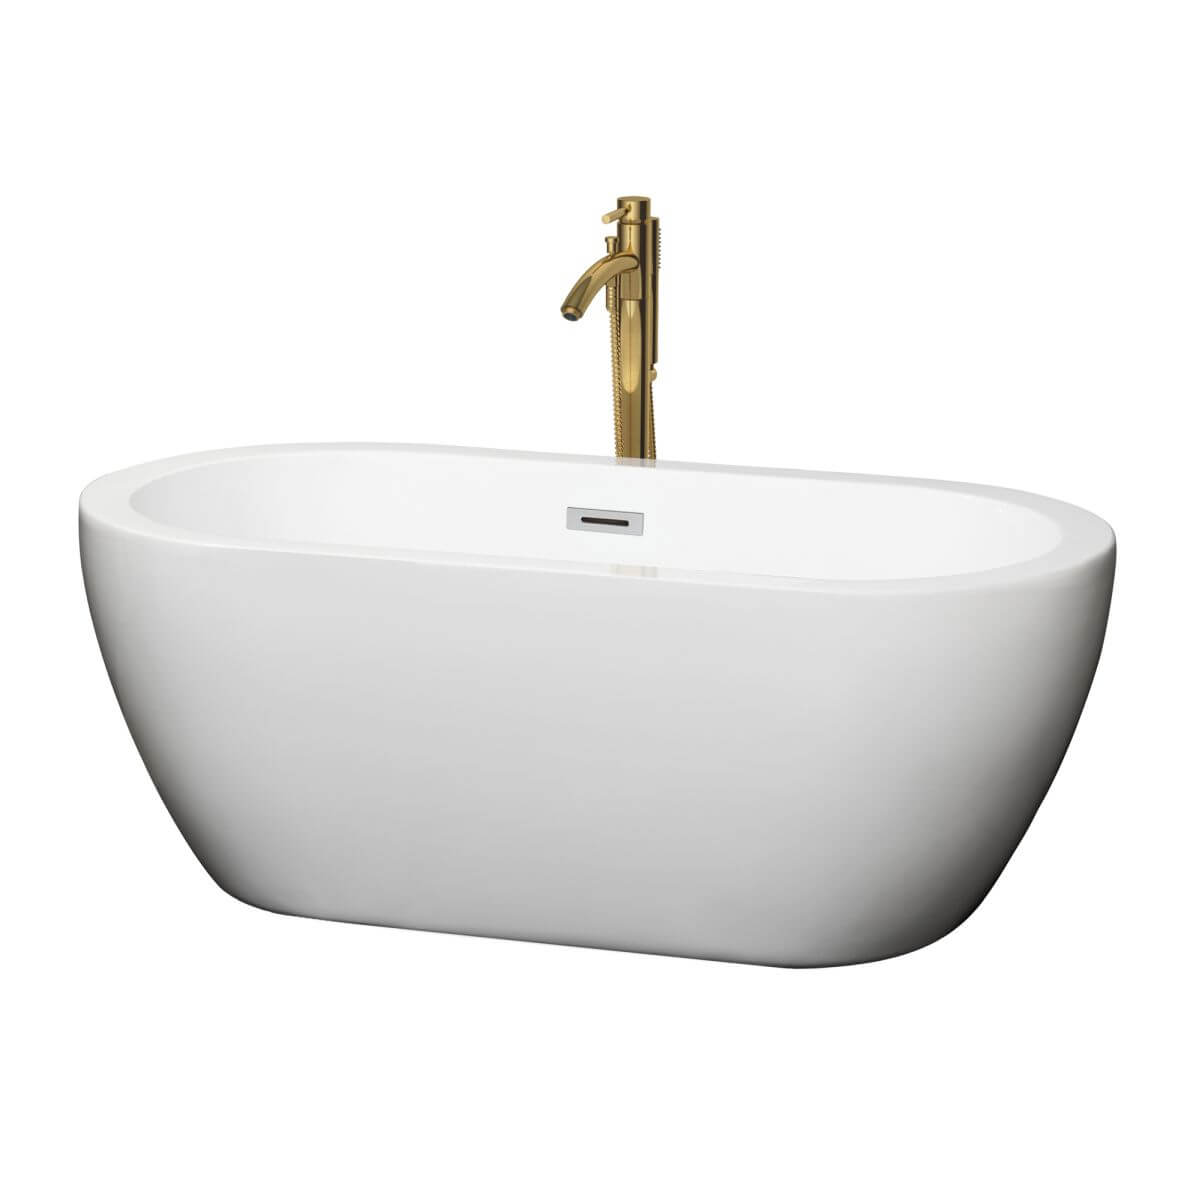 Wyndham Collection Soho 60 inch Freestanding Bathtub in White with Polished Chrome Trim and Floor Mounted Faucet in Brushed Gold - WCOBT100260PCATPGD